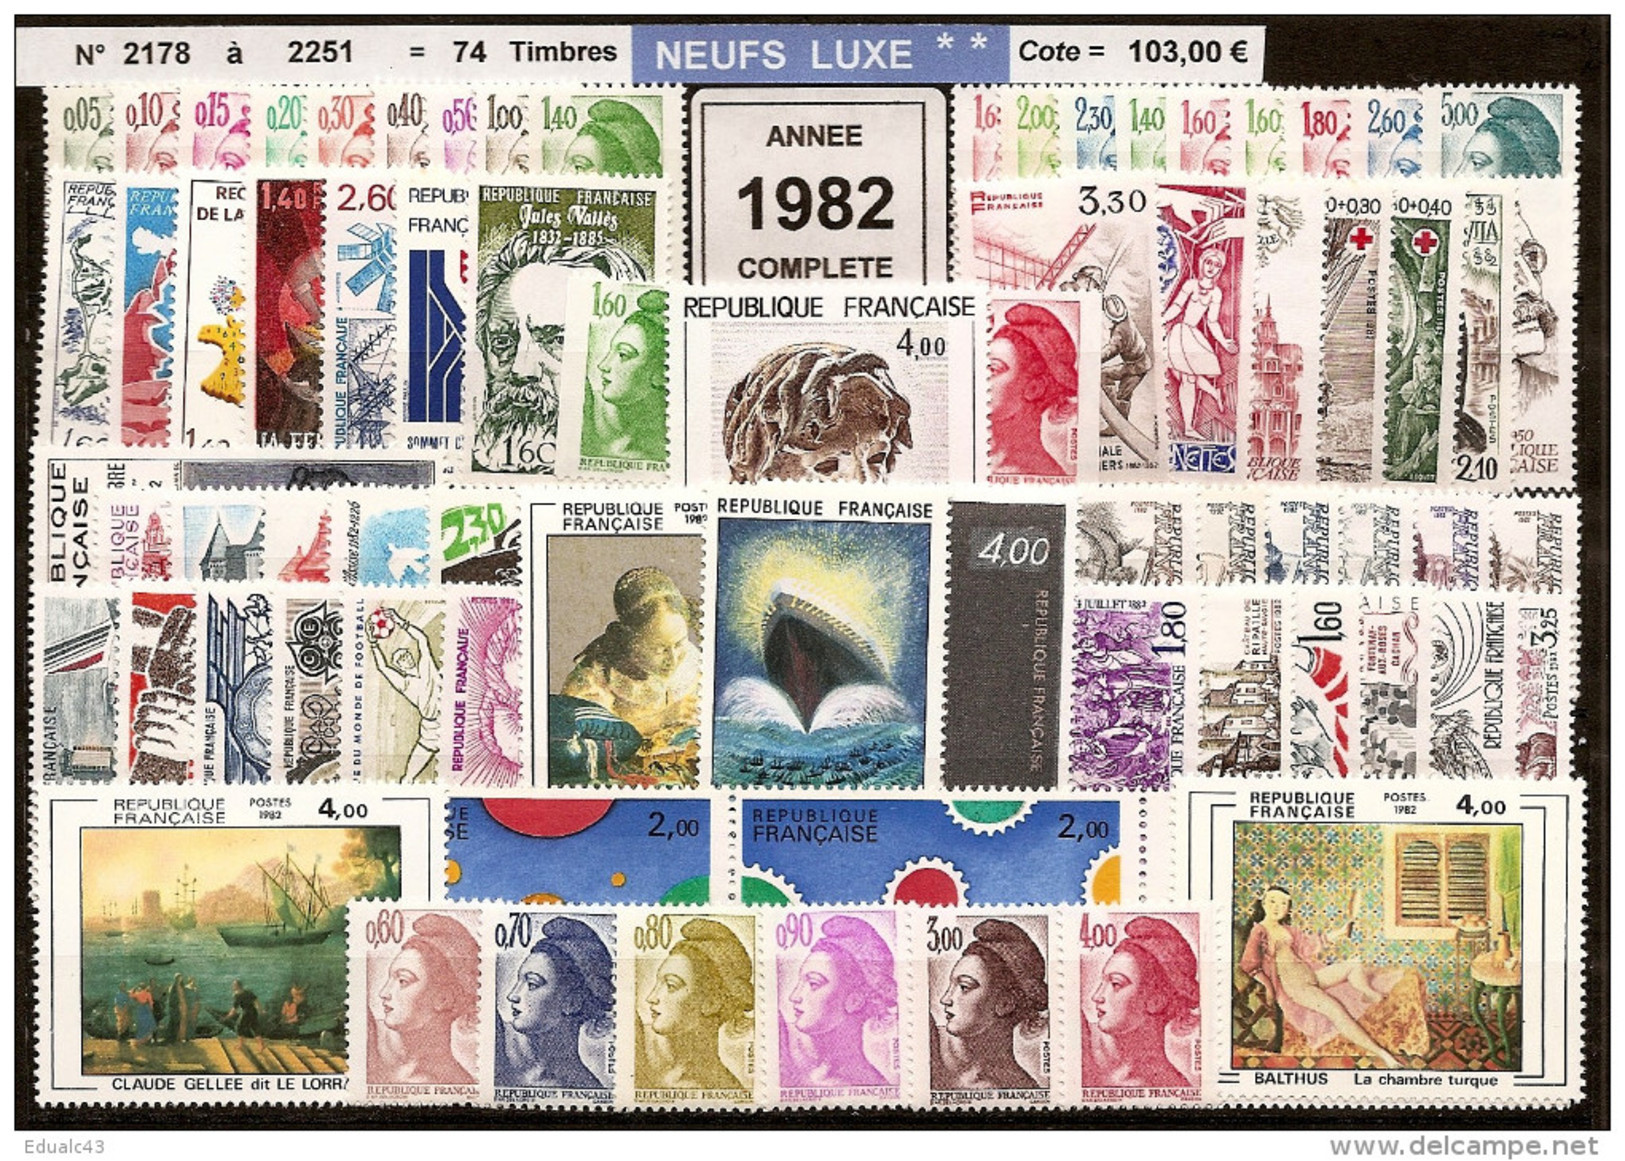 FRANCE - Année Complète 1982 - NEUF LUXE ** 74Timbres - 1980-1989